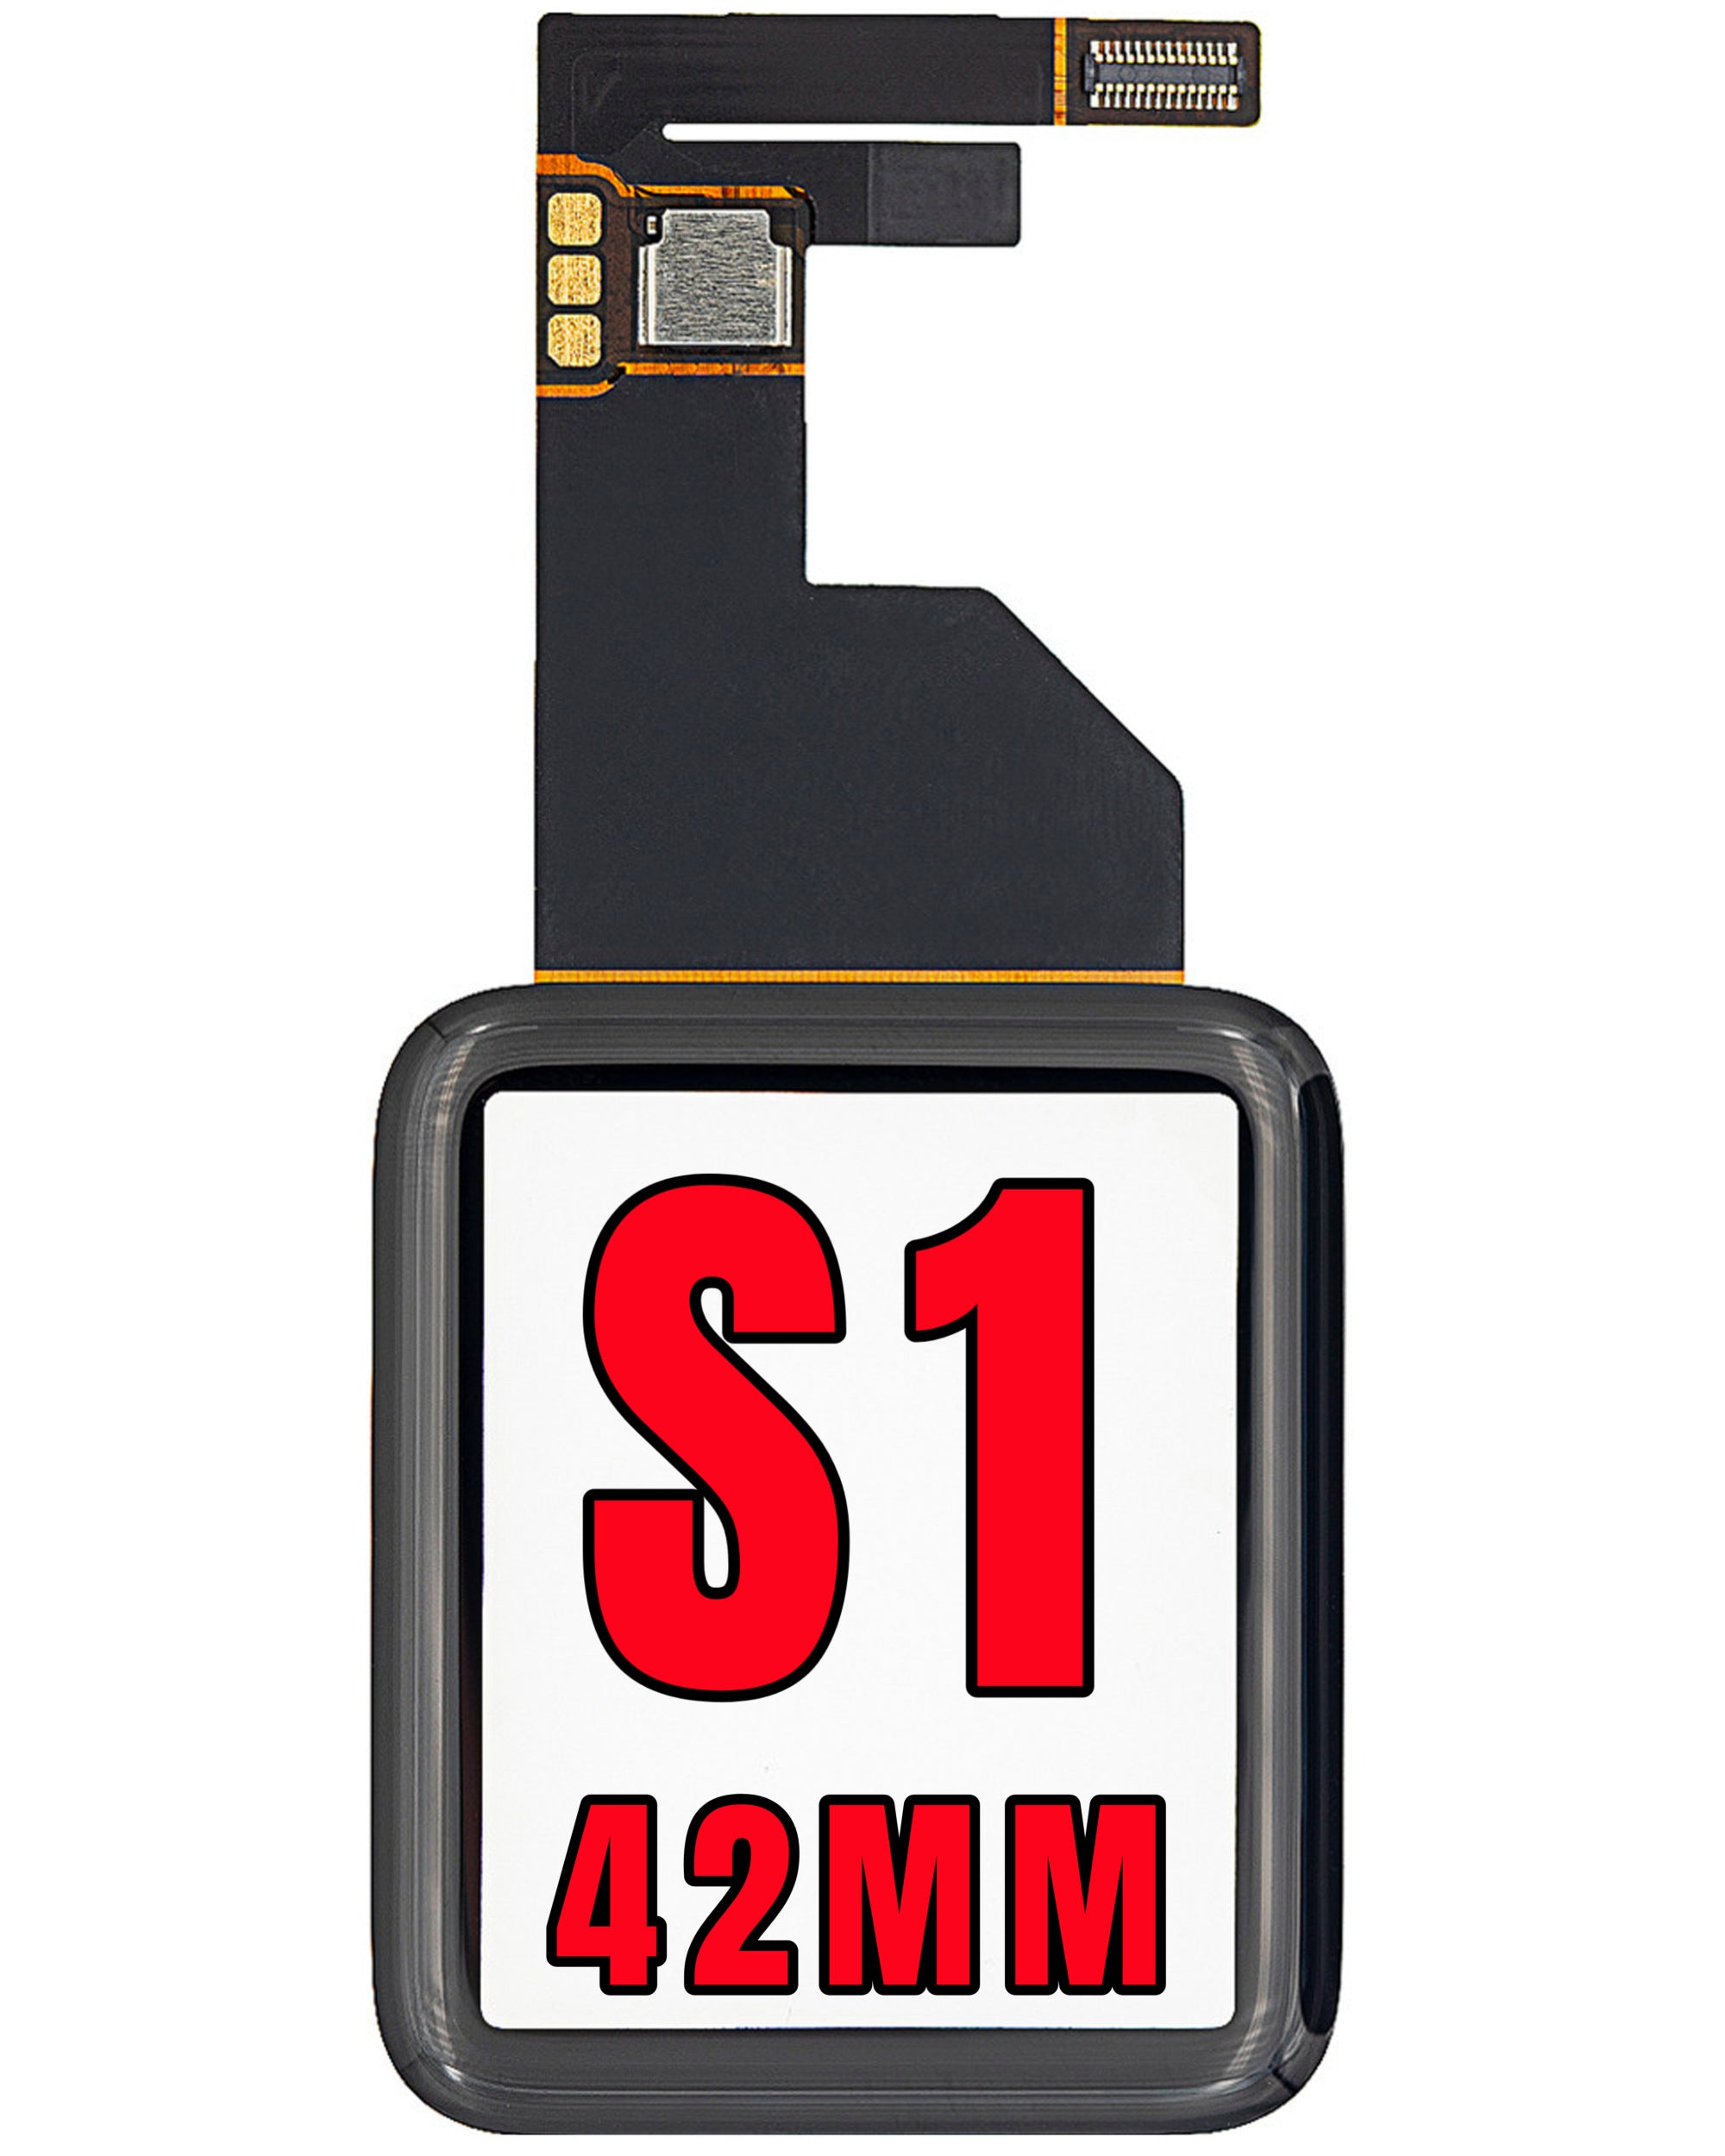 For Watch Series 1 (42MM) Digitizer Glass Replacement (Glass Separation Required)